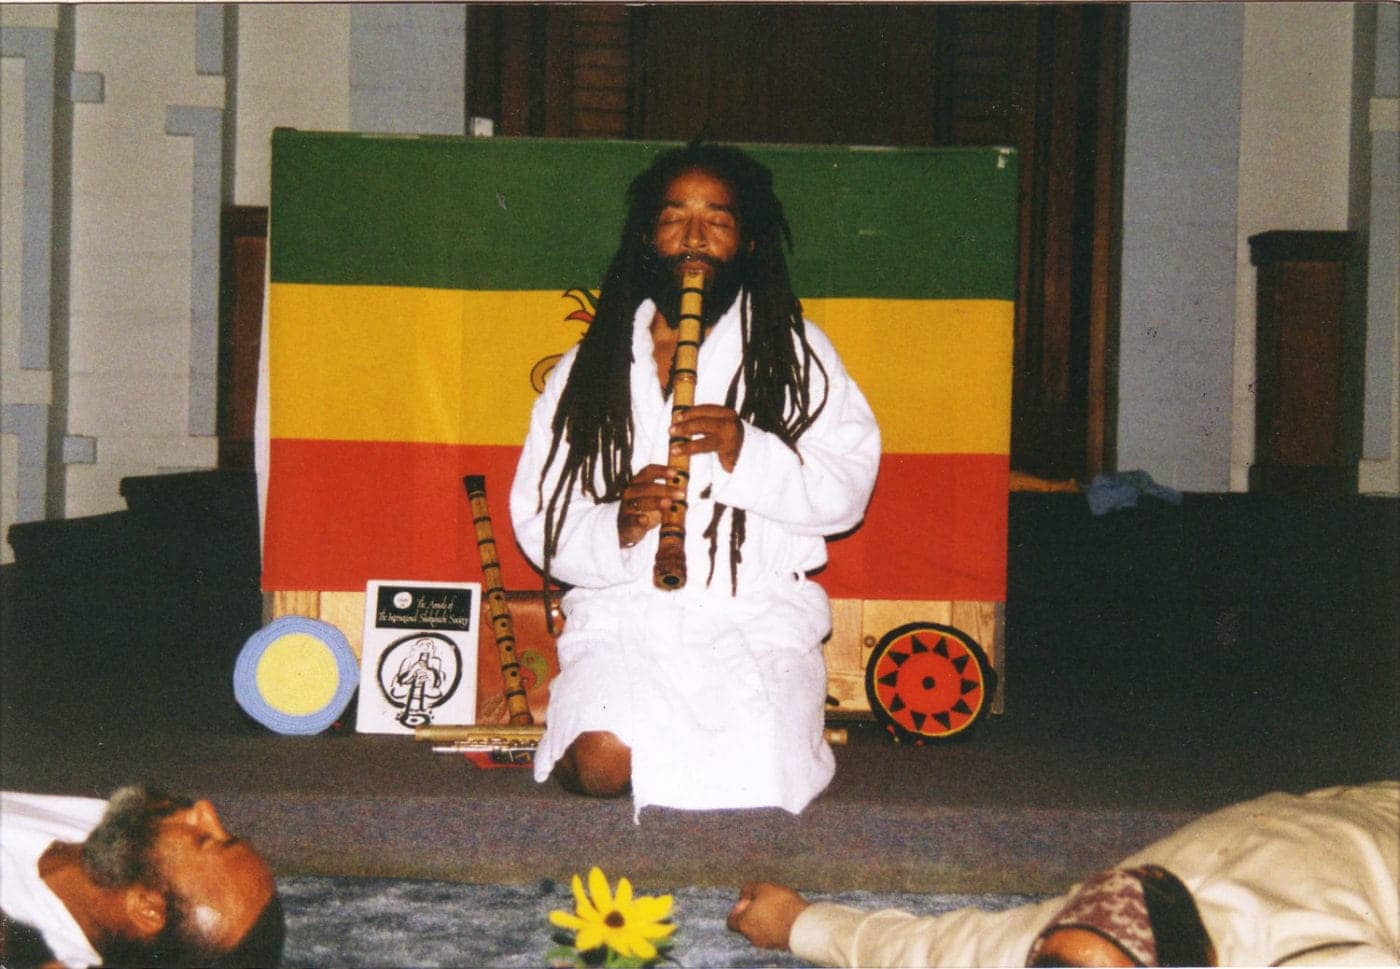 Veronza-Bowers-Rastafarian-meditation-group-blowing-shakuhachi-1400x969, Veronza Bowers, political prisoner and healer: Making the wounded whole, Abolition Now! 